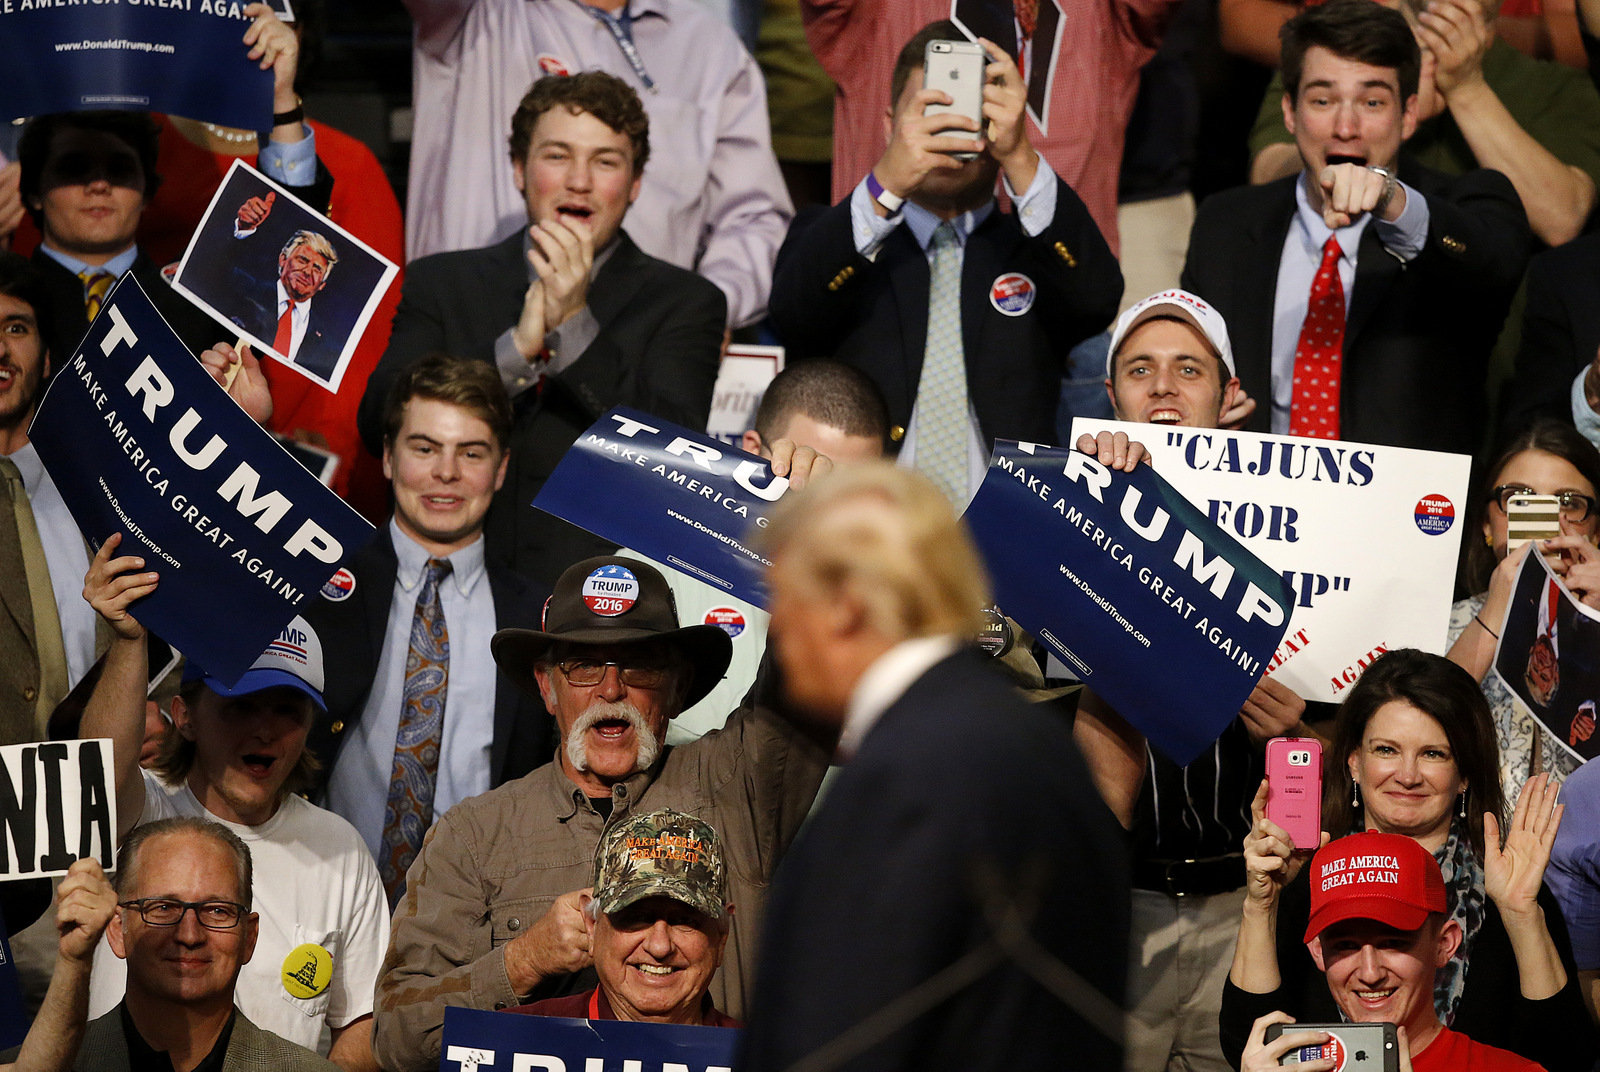 The crowd cheers as Republican presidential candidate Donald Trump speaks at a campaign rally in Baton Rouge, La., Thursday, Feb. 11, 2016. (AP Photo/Gerald Herbert)